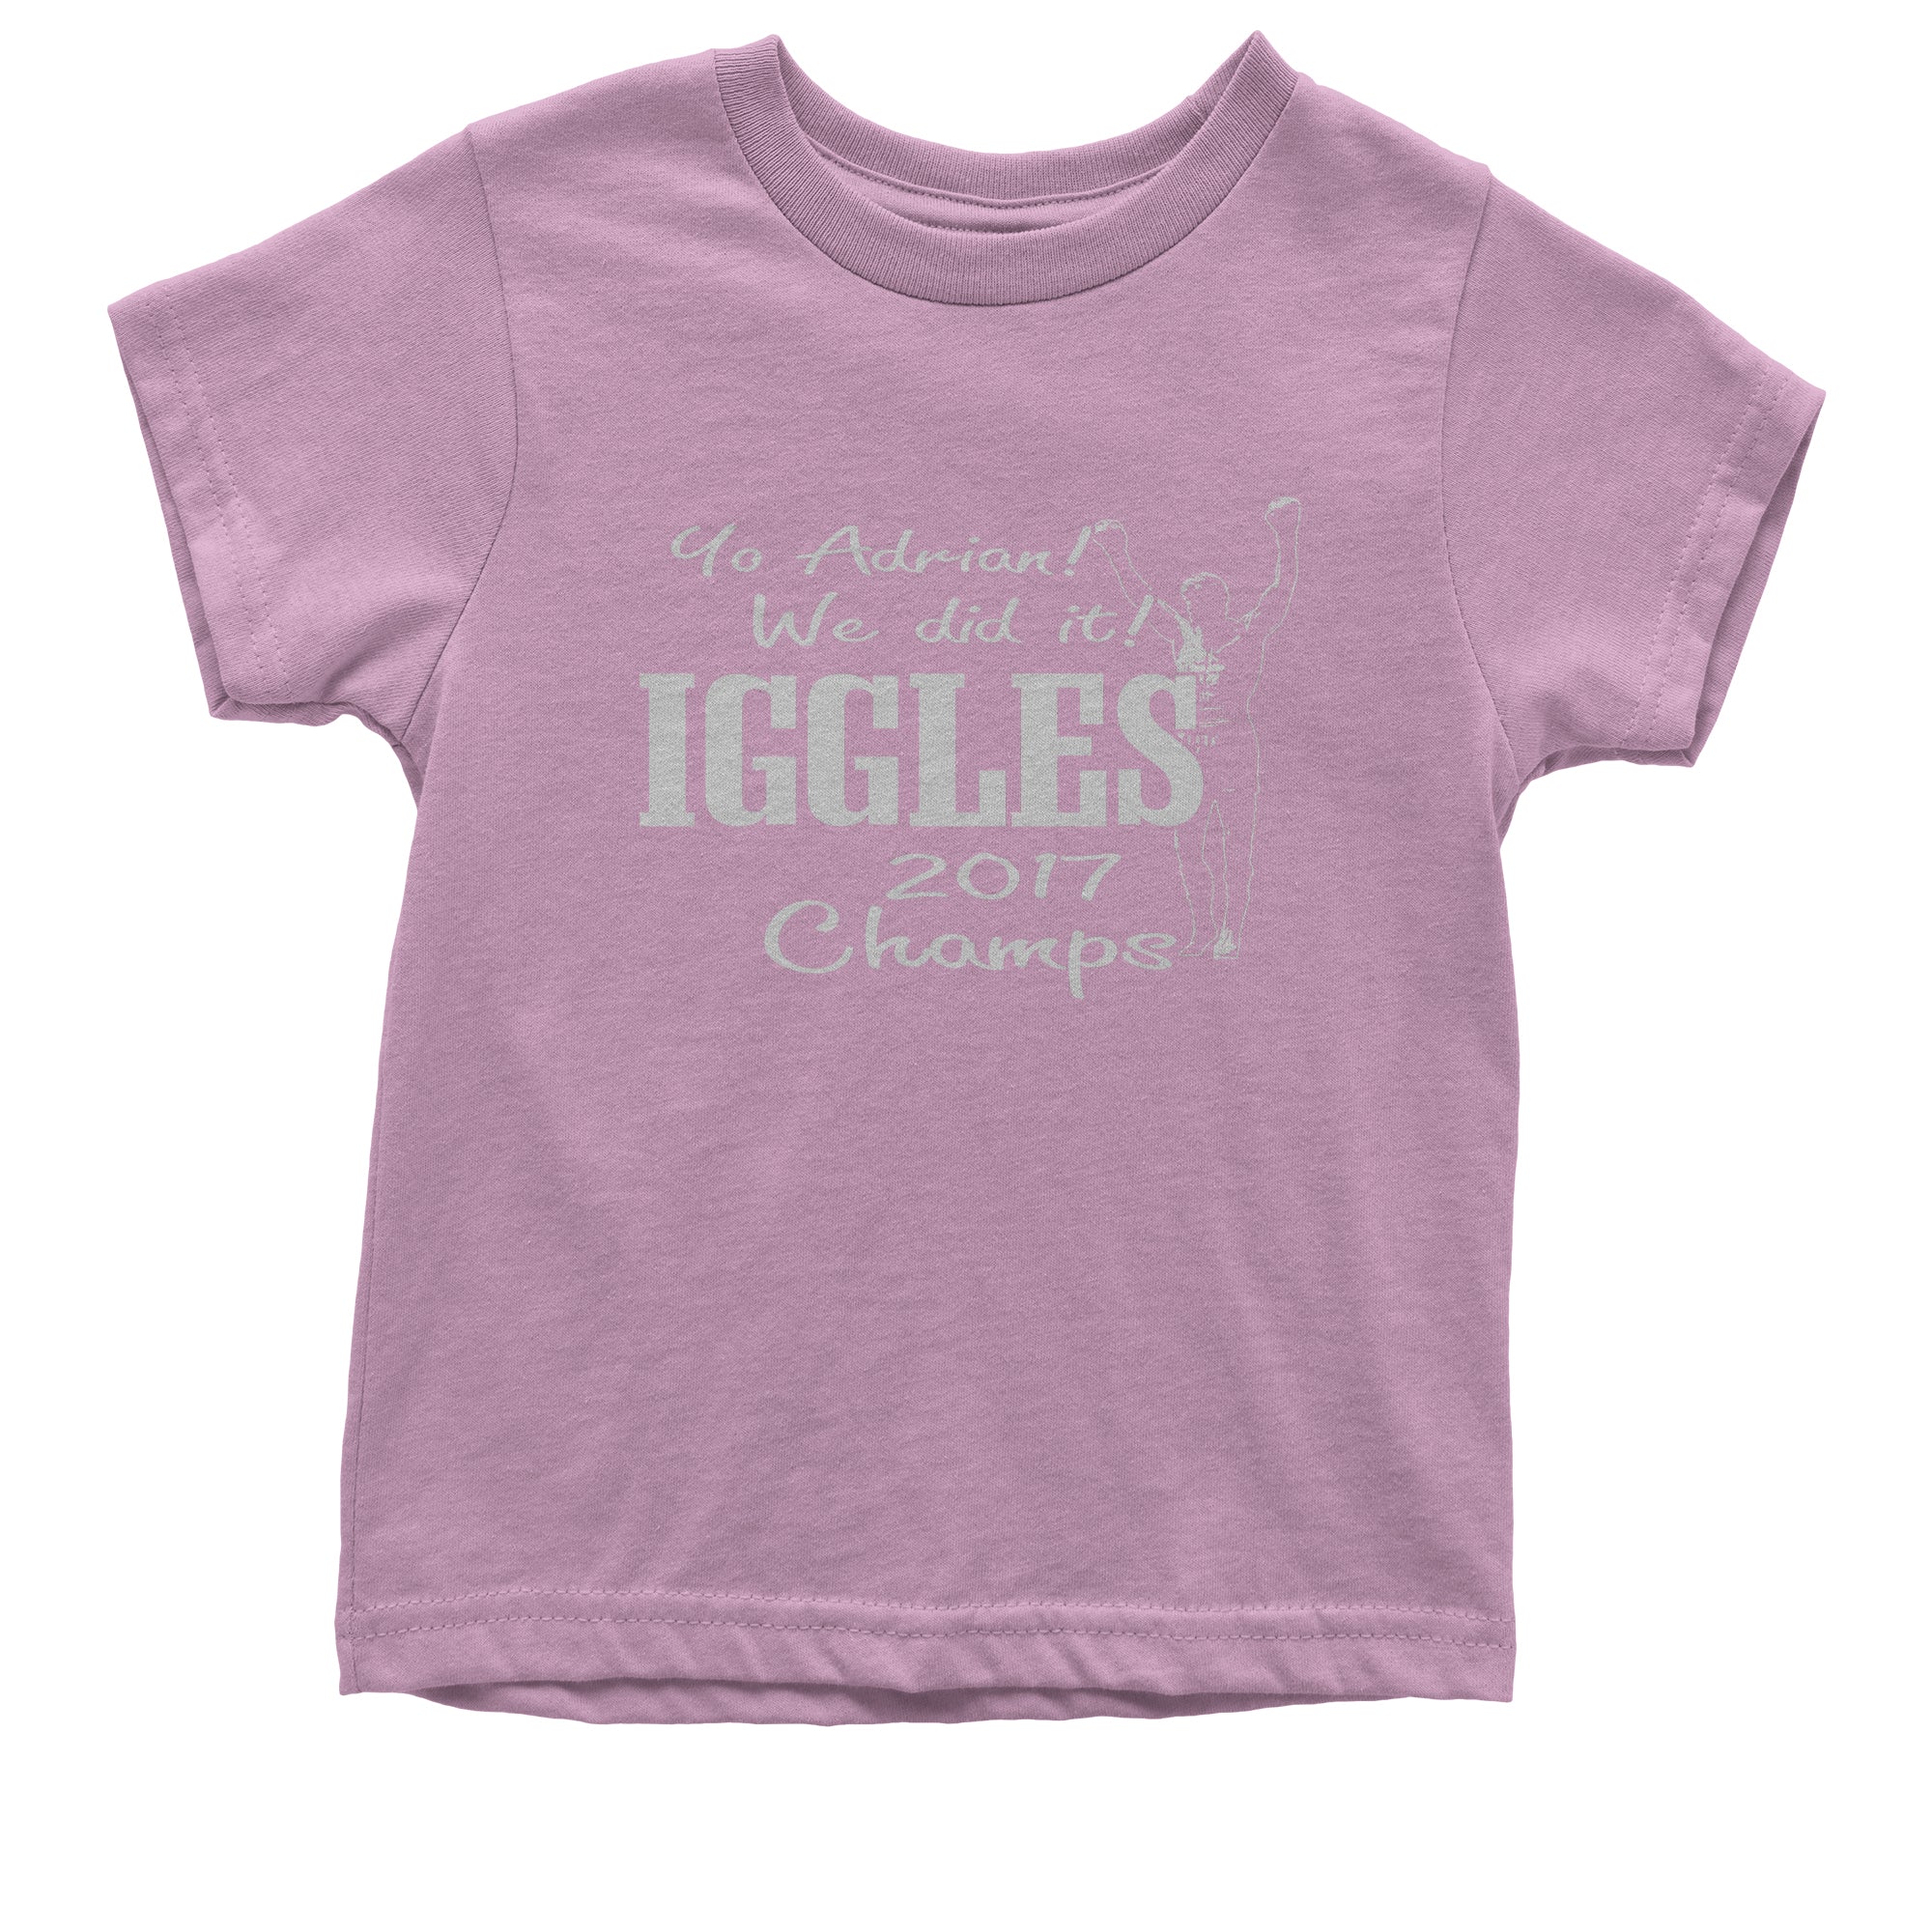 Philly Iggles Football Champs 2017 Kid's T-Shirt